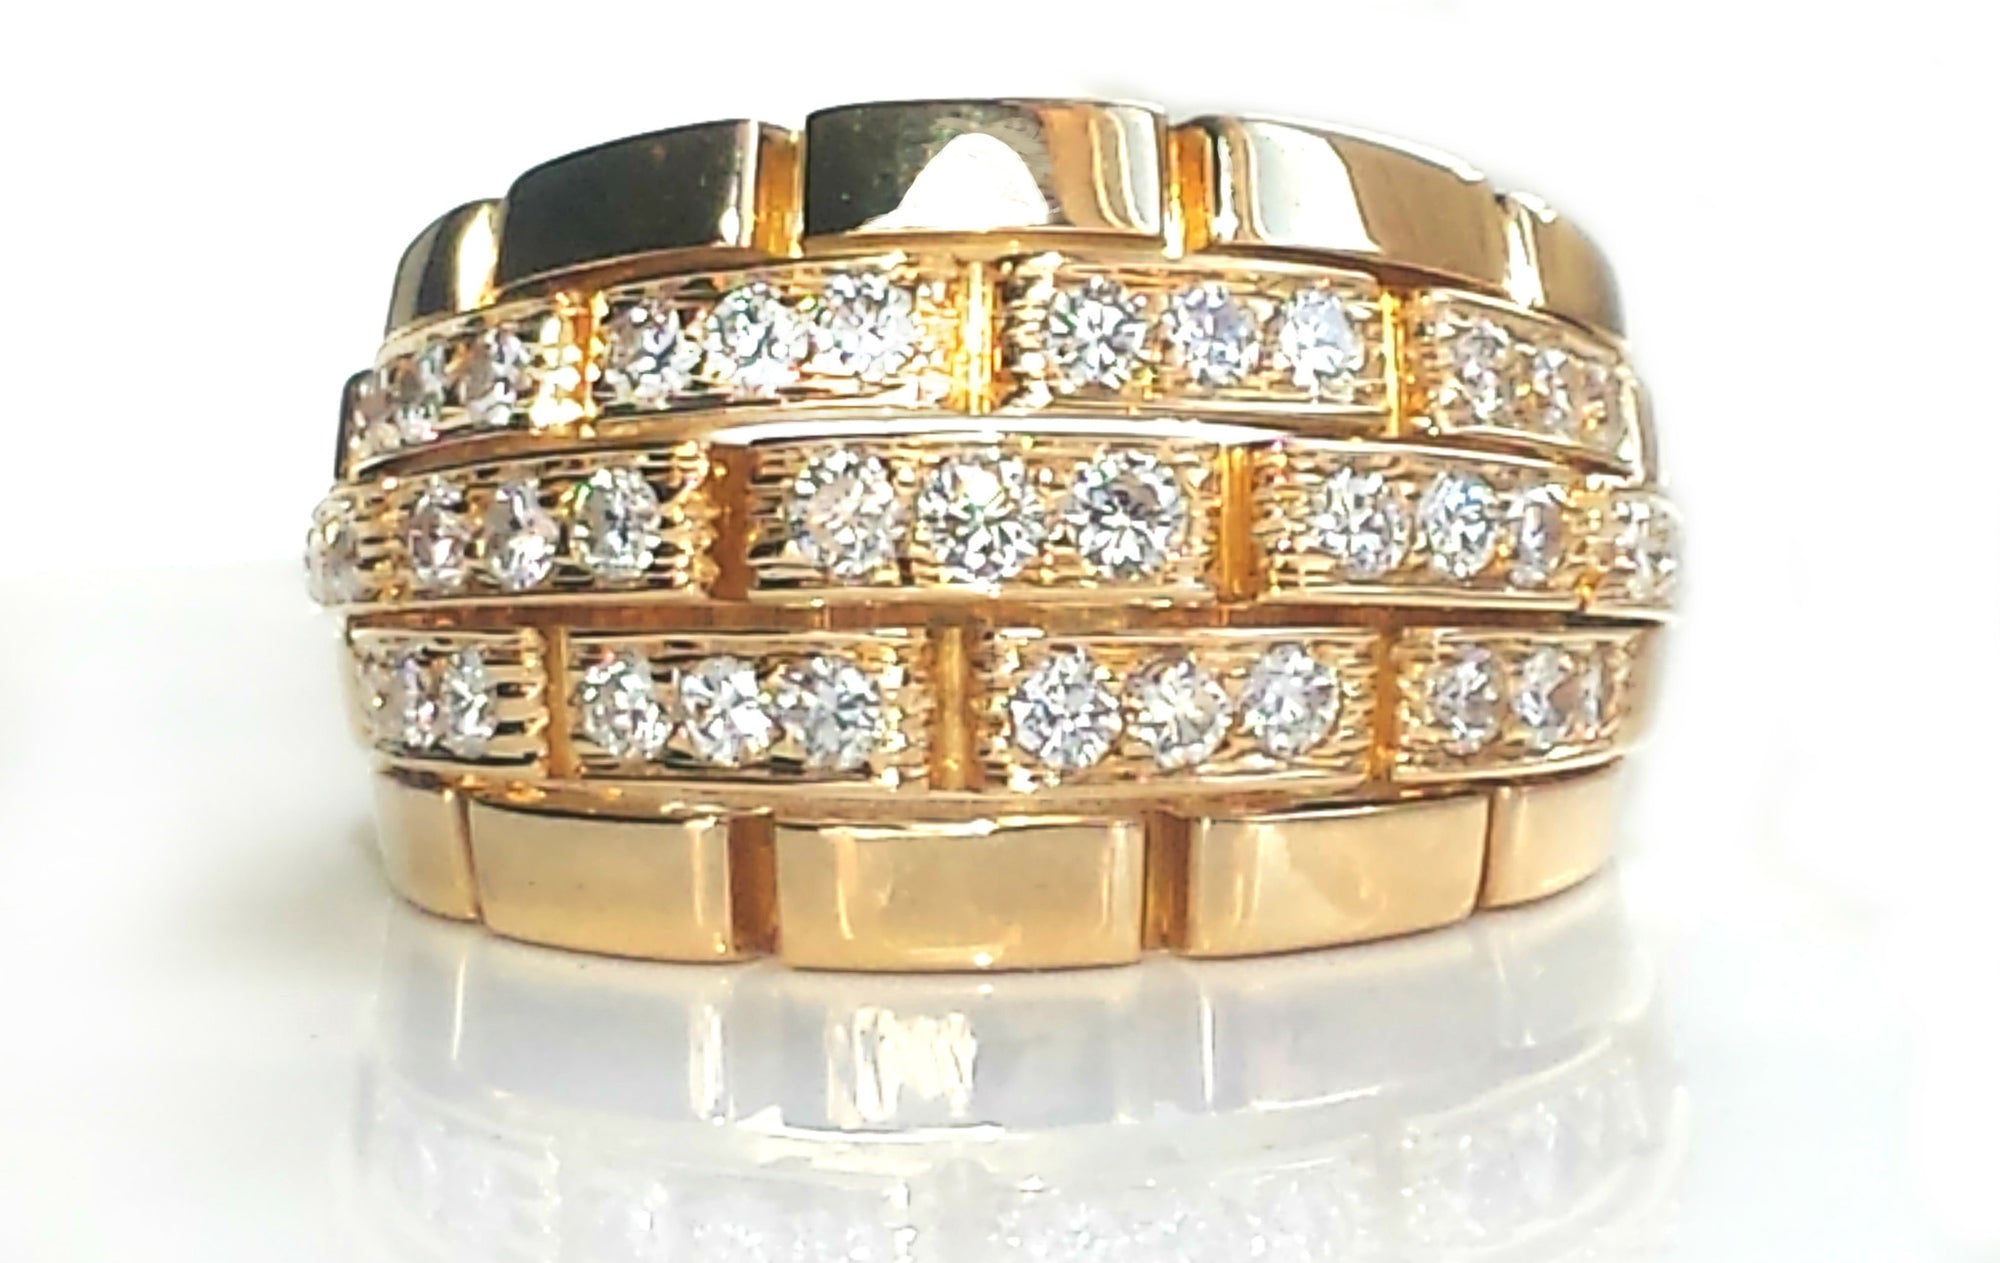 Cartier Vintage 1980s Maillon Panthere 5 Row Diamond Bombe Ring in 18k Gold, Size N